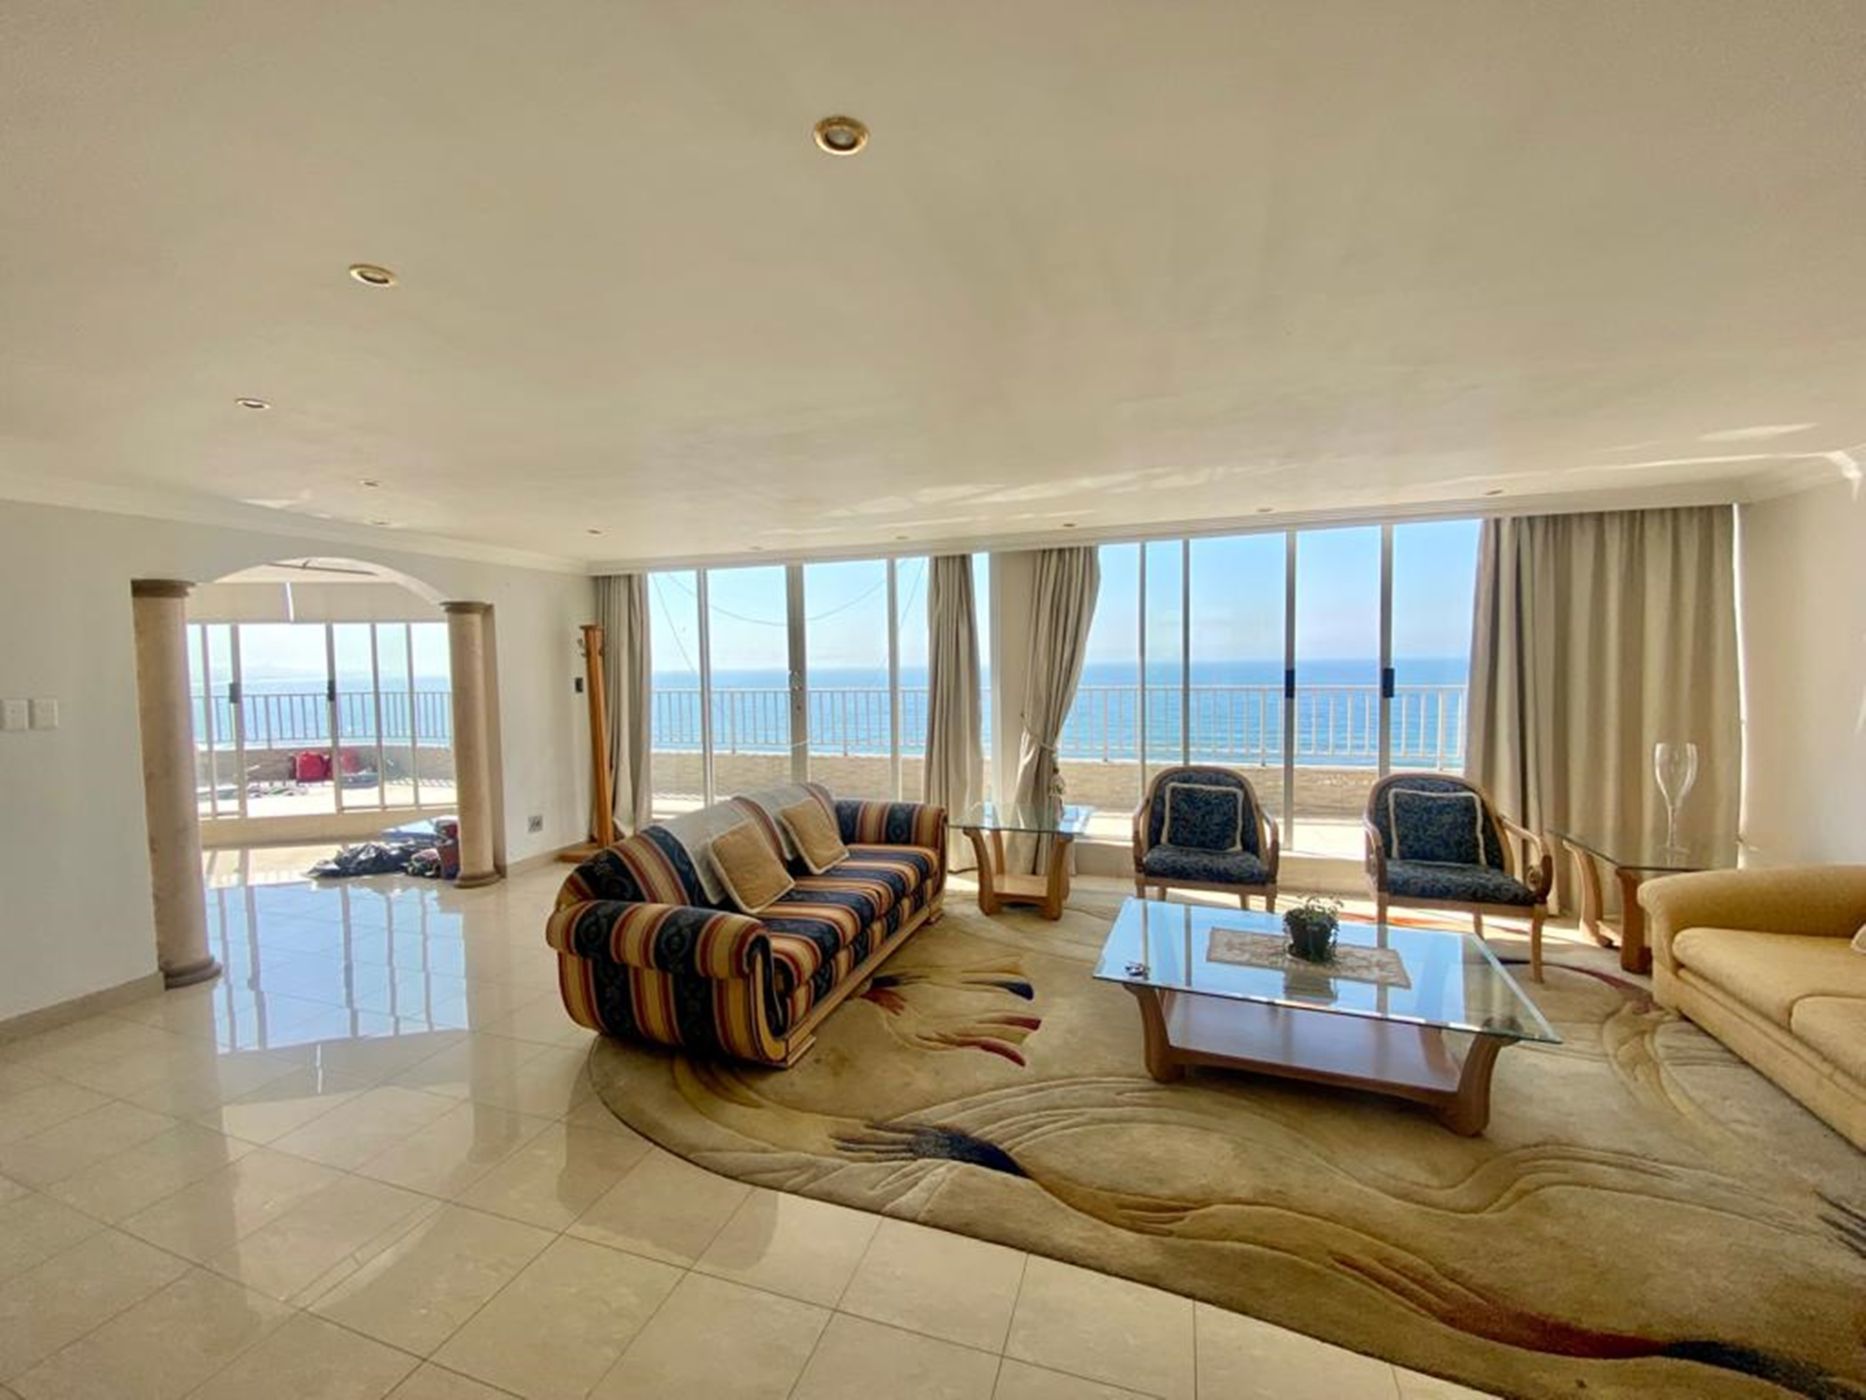 Spectacular 6 Bedroom Penthouse Apartment For Sale in South Beach Durban